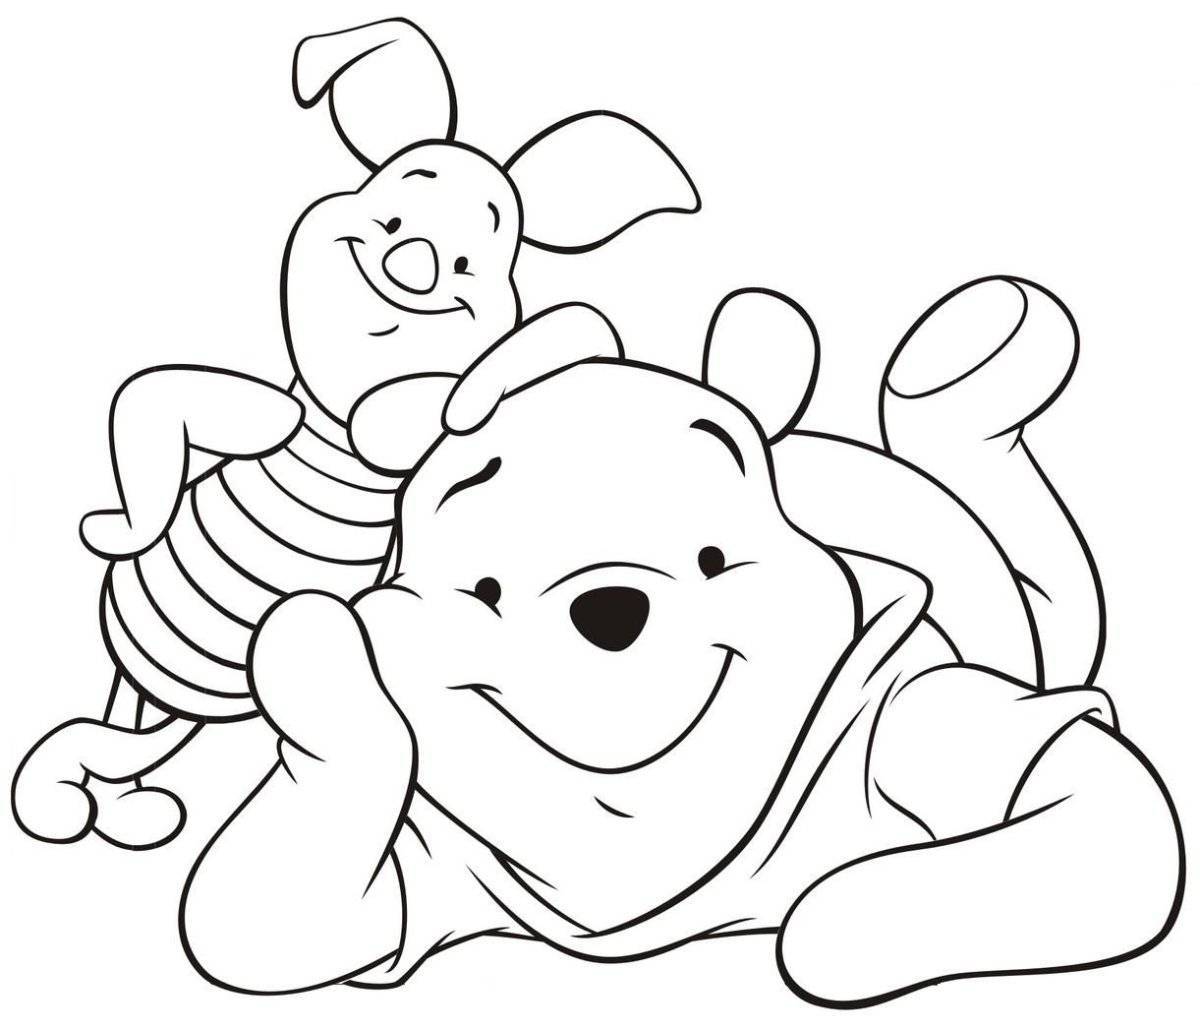 Winnie the Pooh coloring book